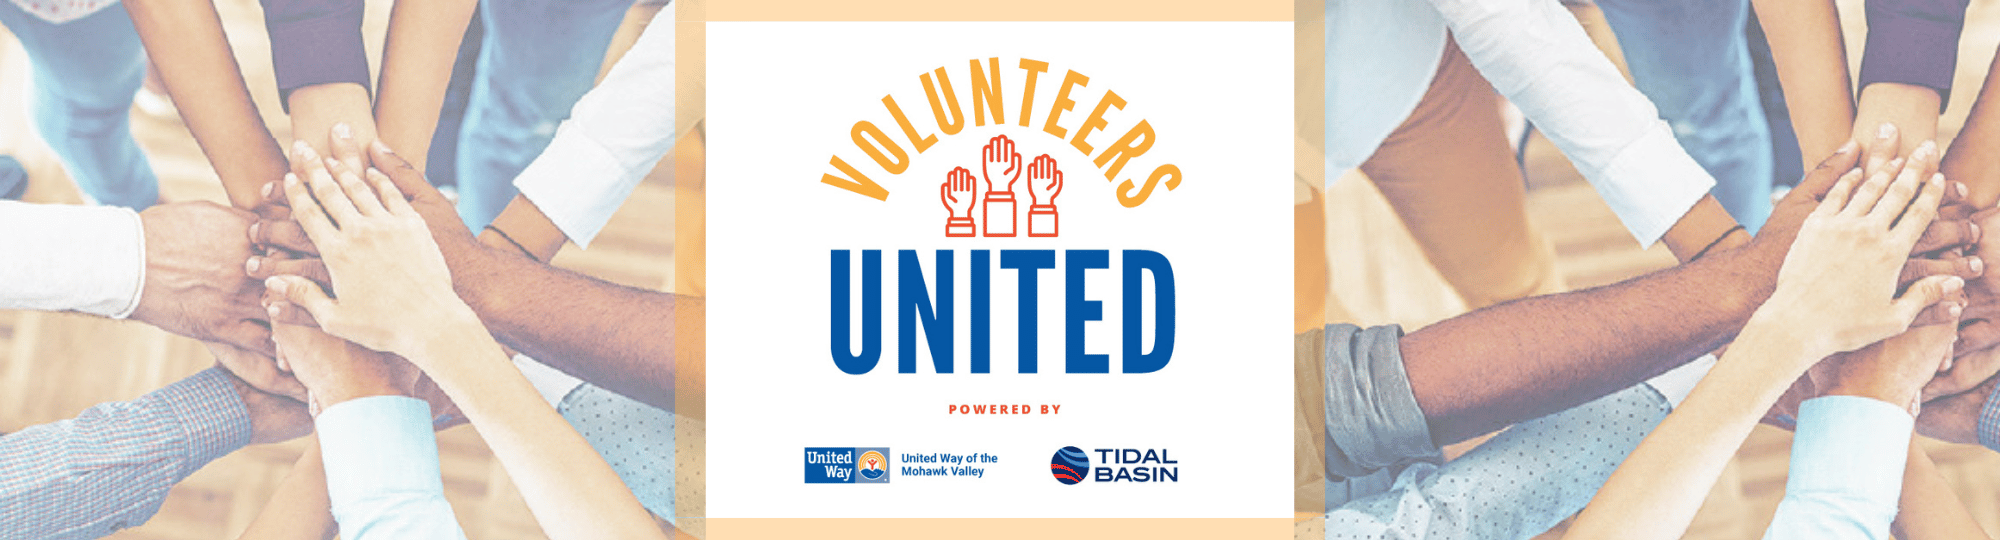 hands joined together, volunteers united logo powered by United Way of the Mohawk Valley and Tidal Basin